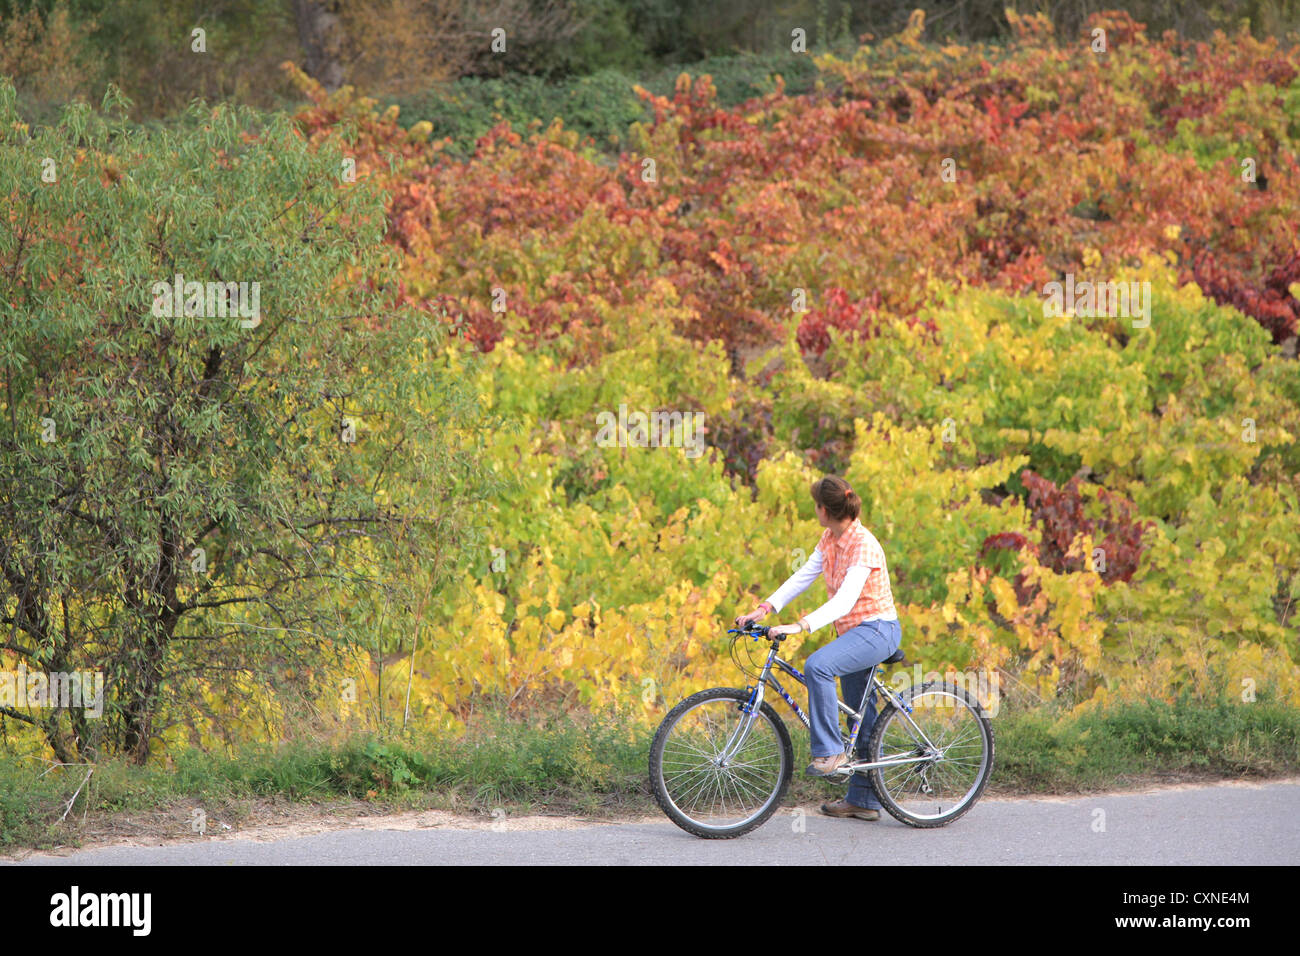 Autumn colors, Cycling in Rioja wine region, Spain, Europe, Stock Photo